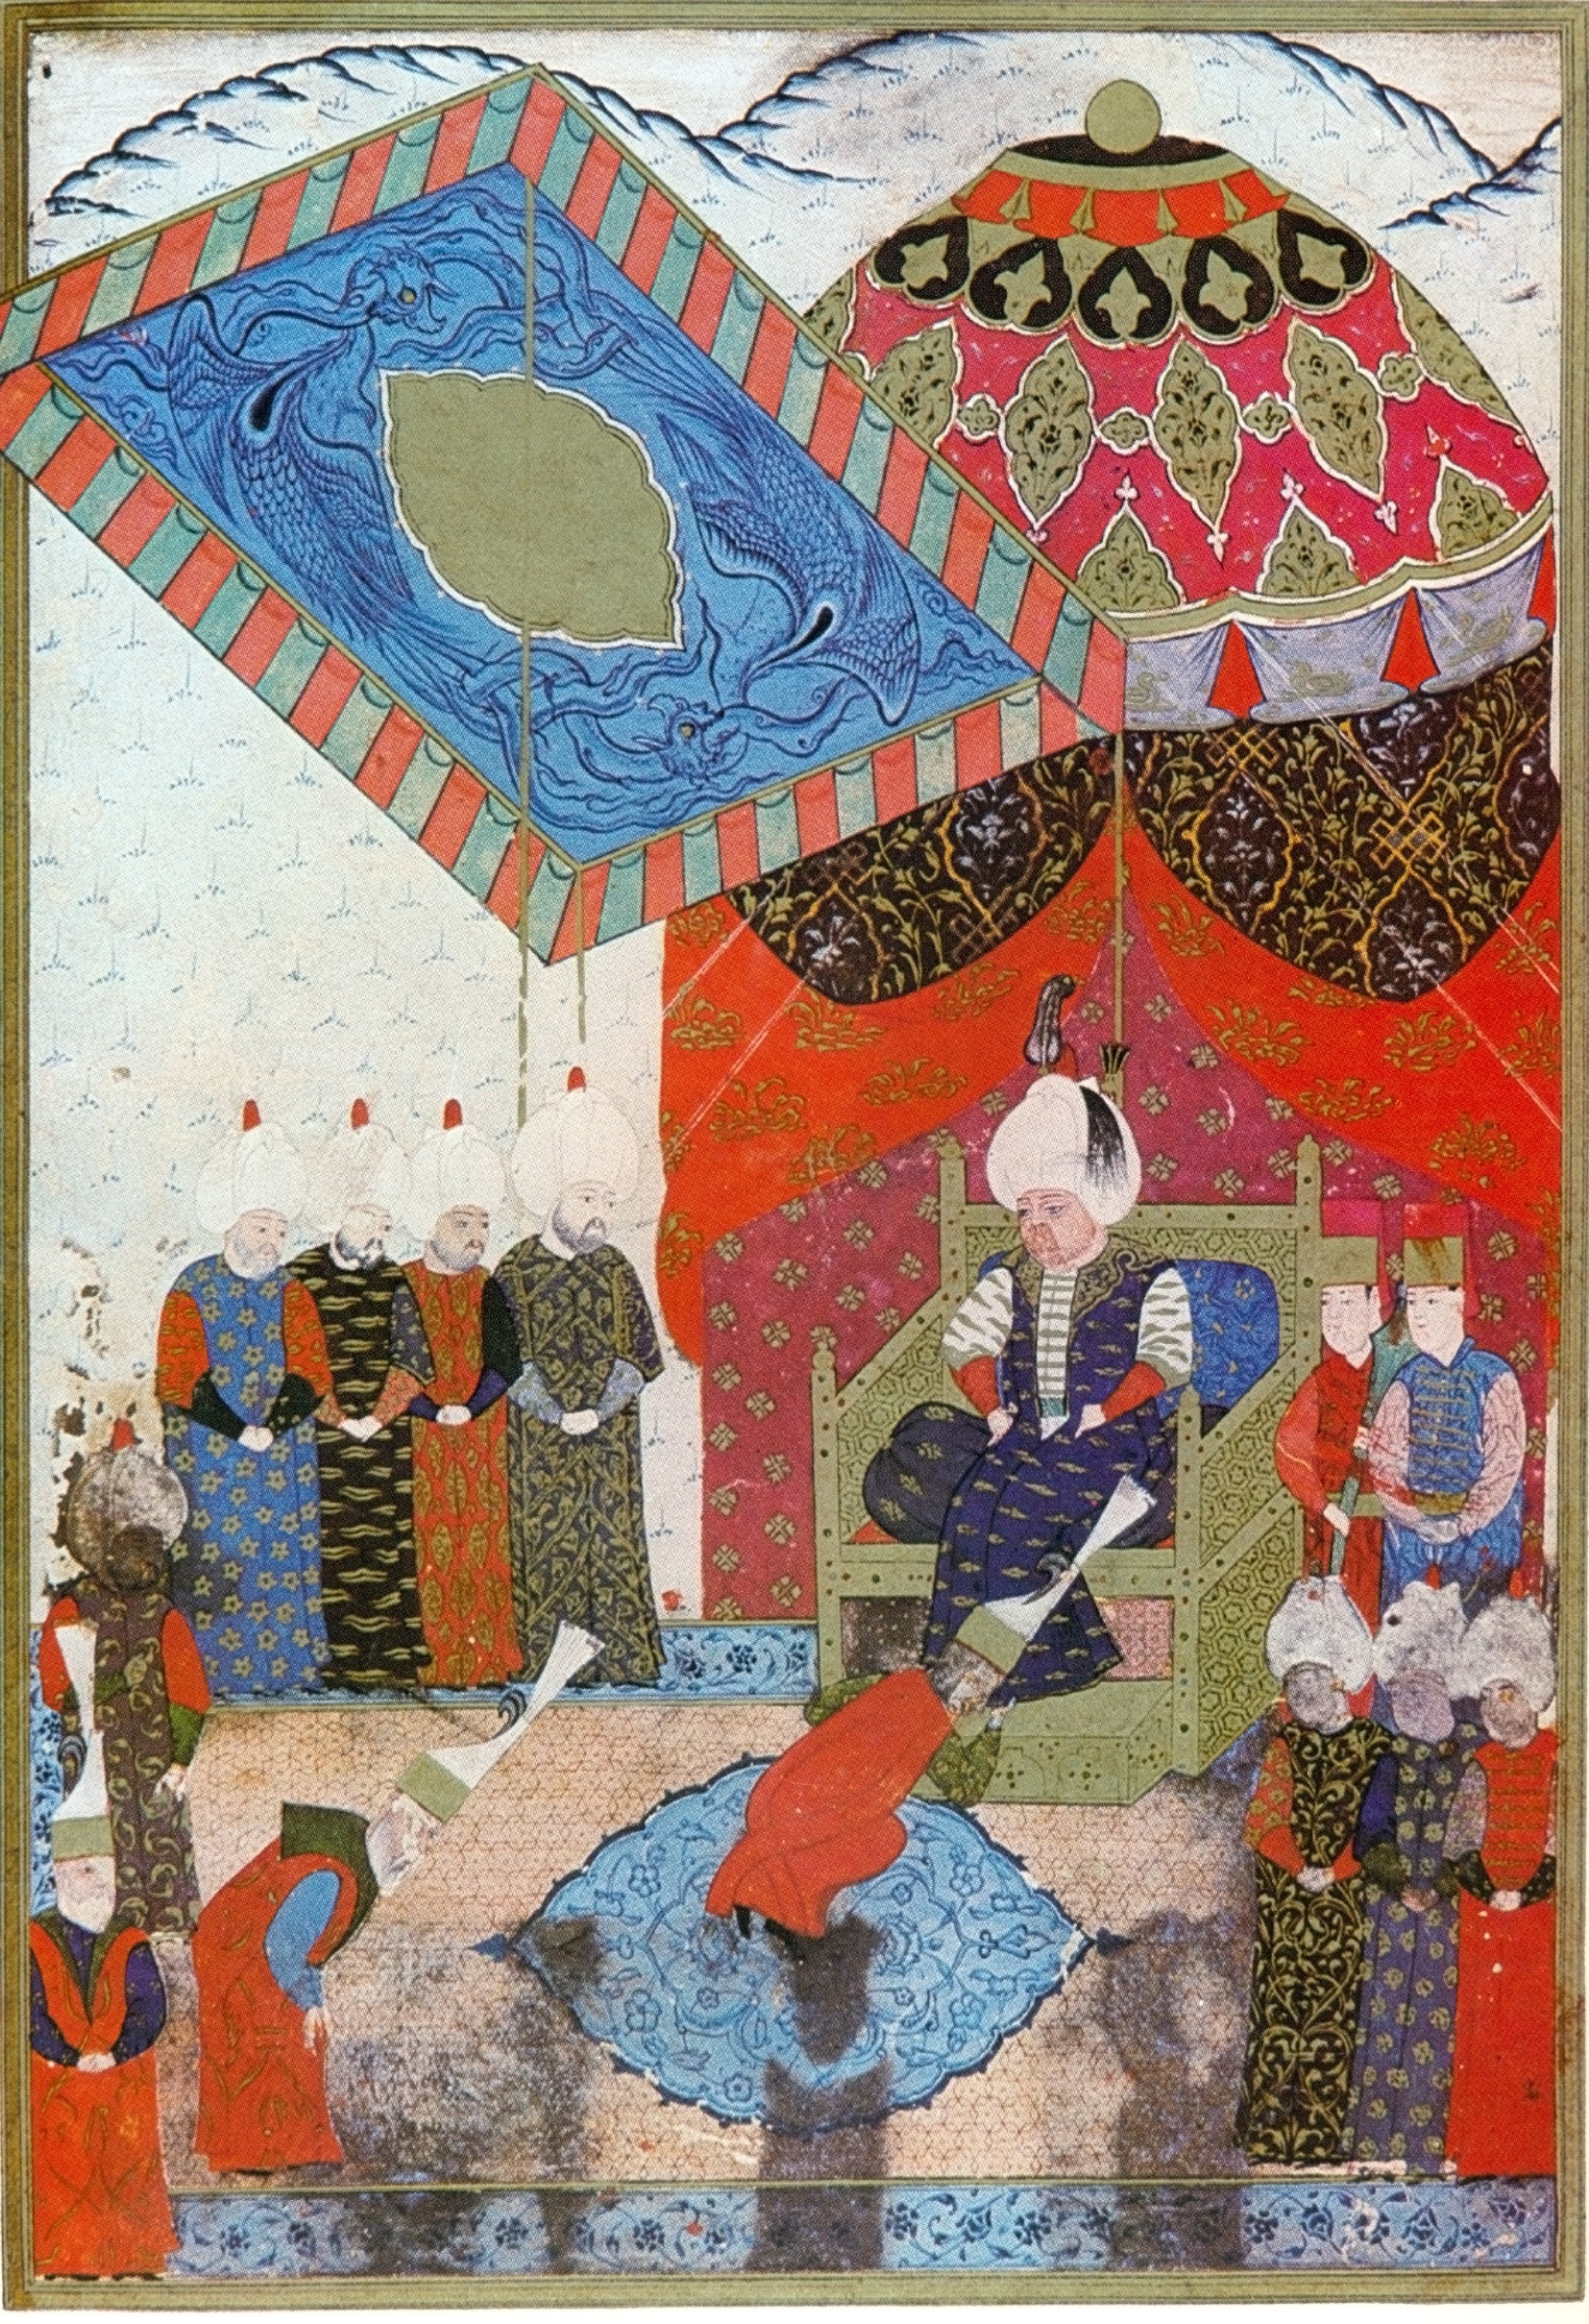 Selim II ascends to the throne, 16th century, Topkapı Palace collection.